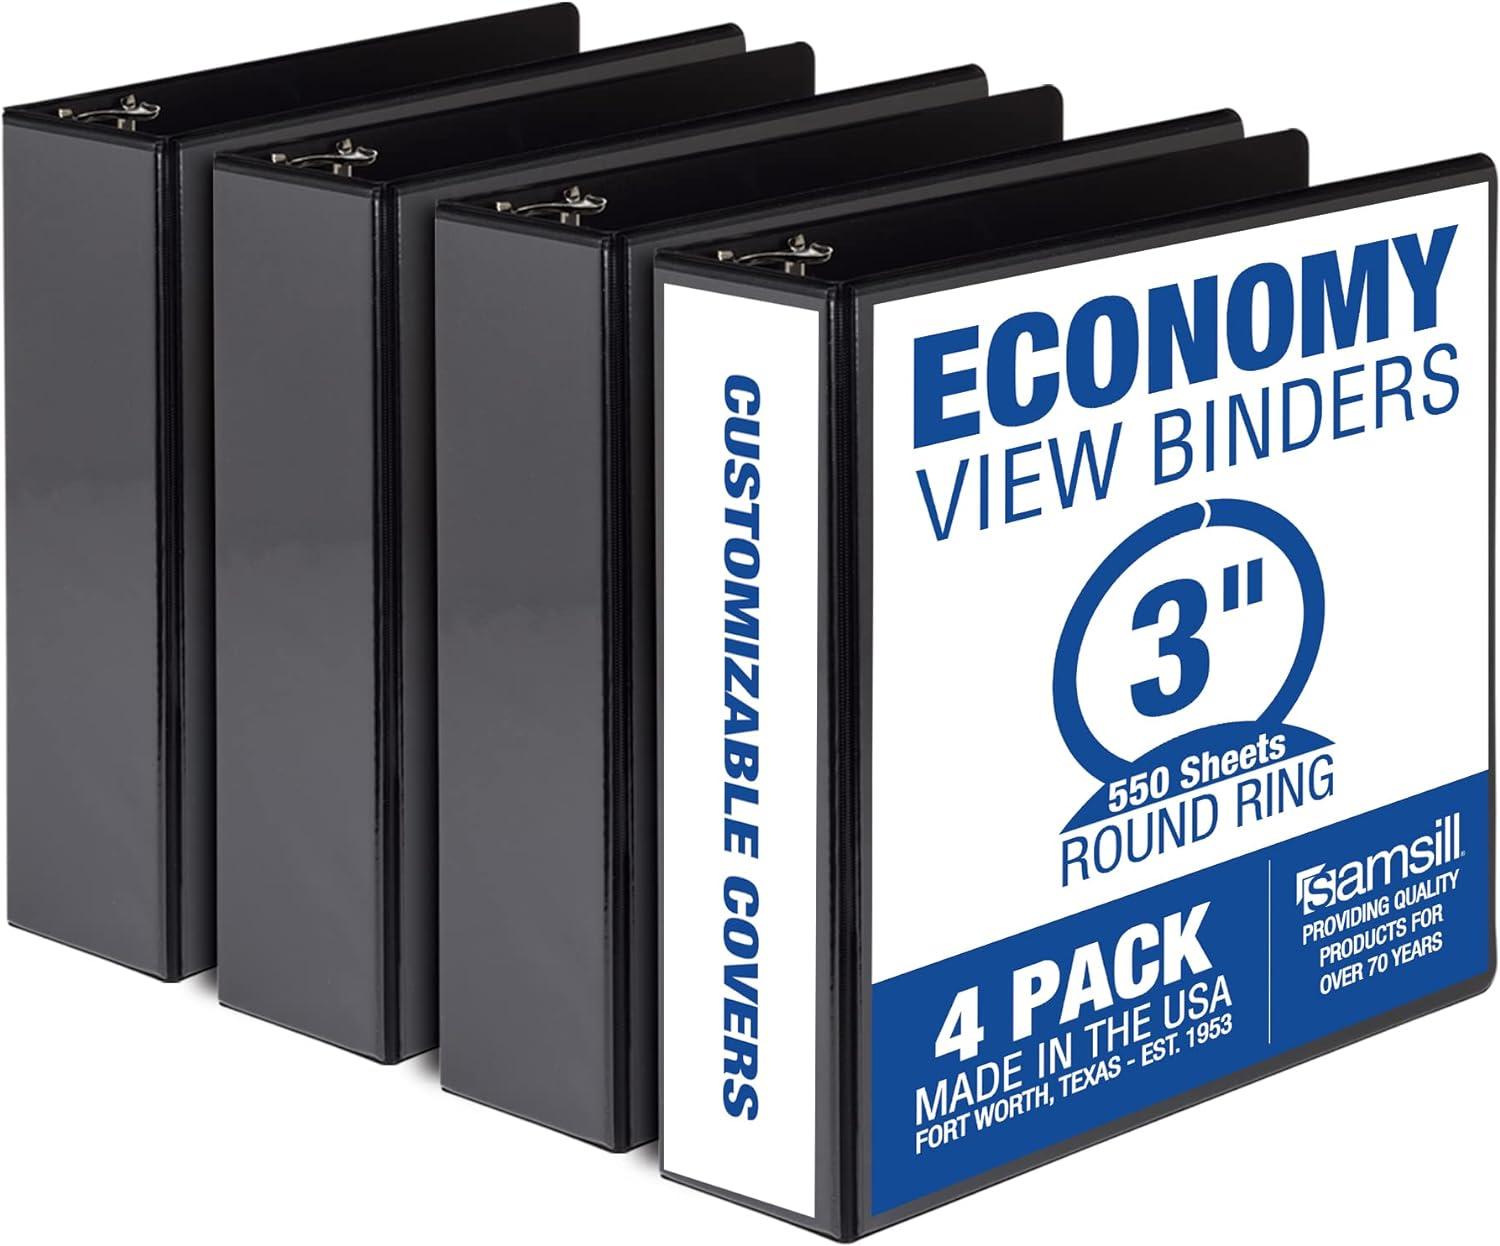 samsill economy 3 inch 3 ring binder made in the usa round ring binder customizable clear view cover black 4